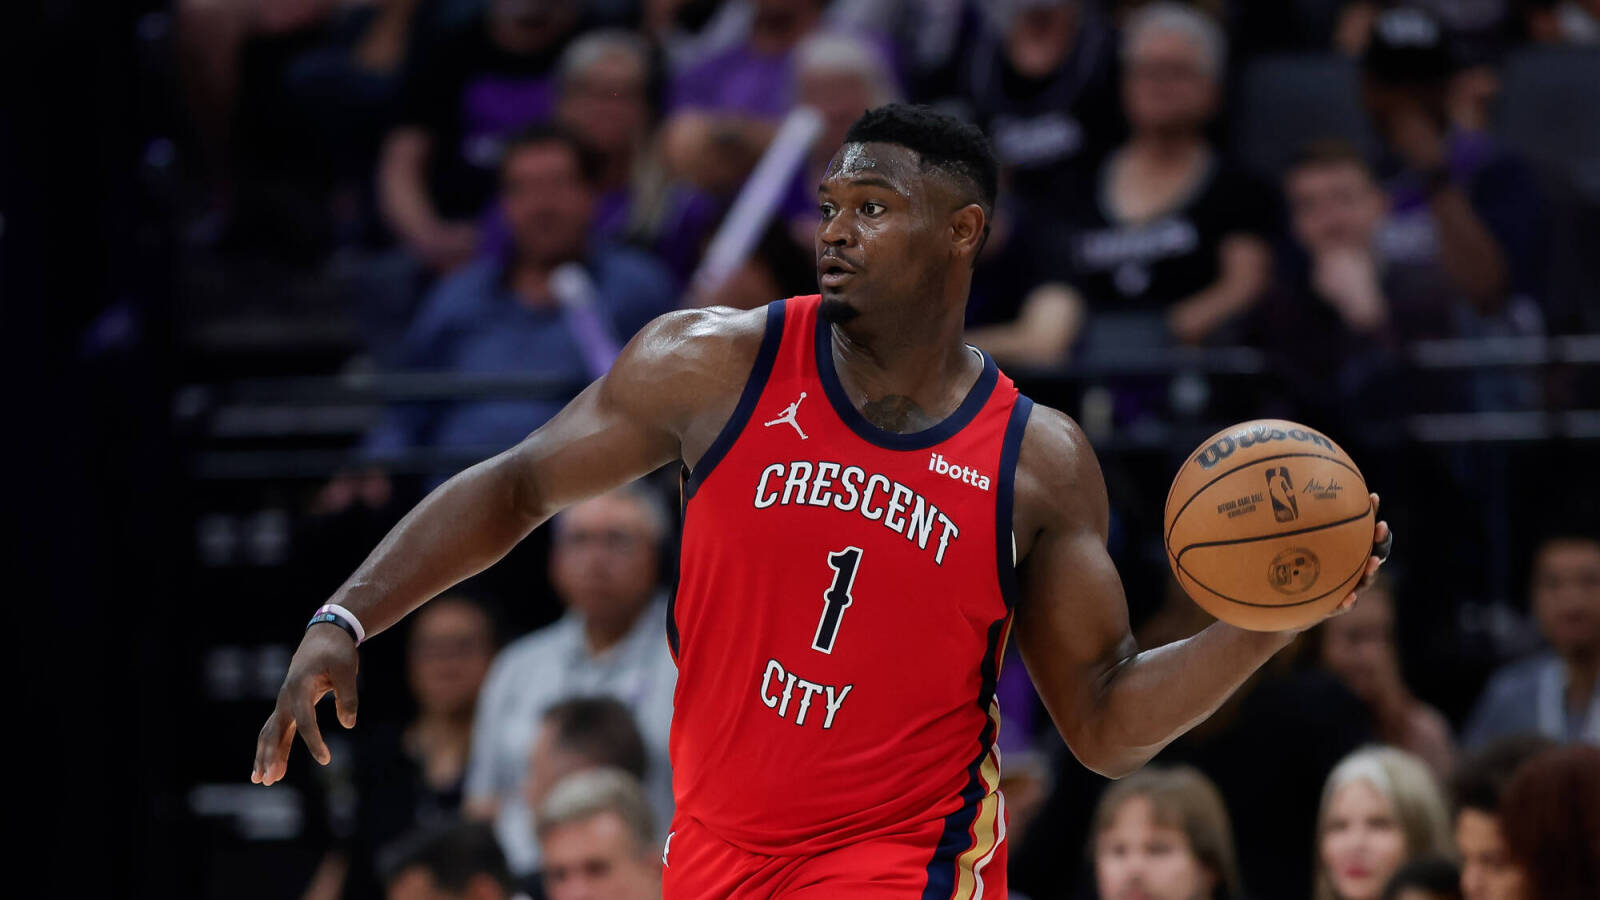 New Orleans Pelicans: Zion Williamson Vows to Work On These 2 Things to Improve His Game in the Summer